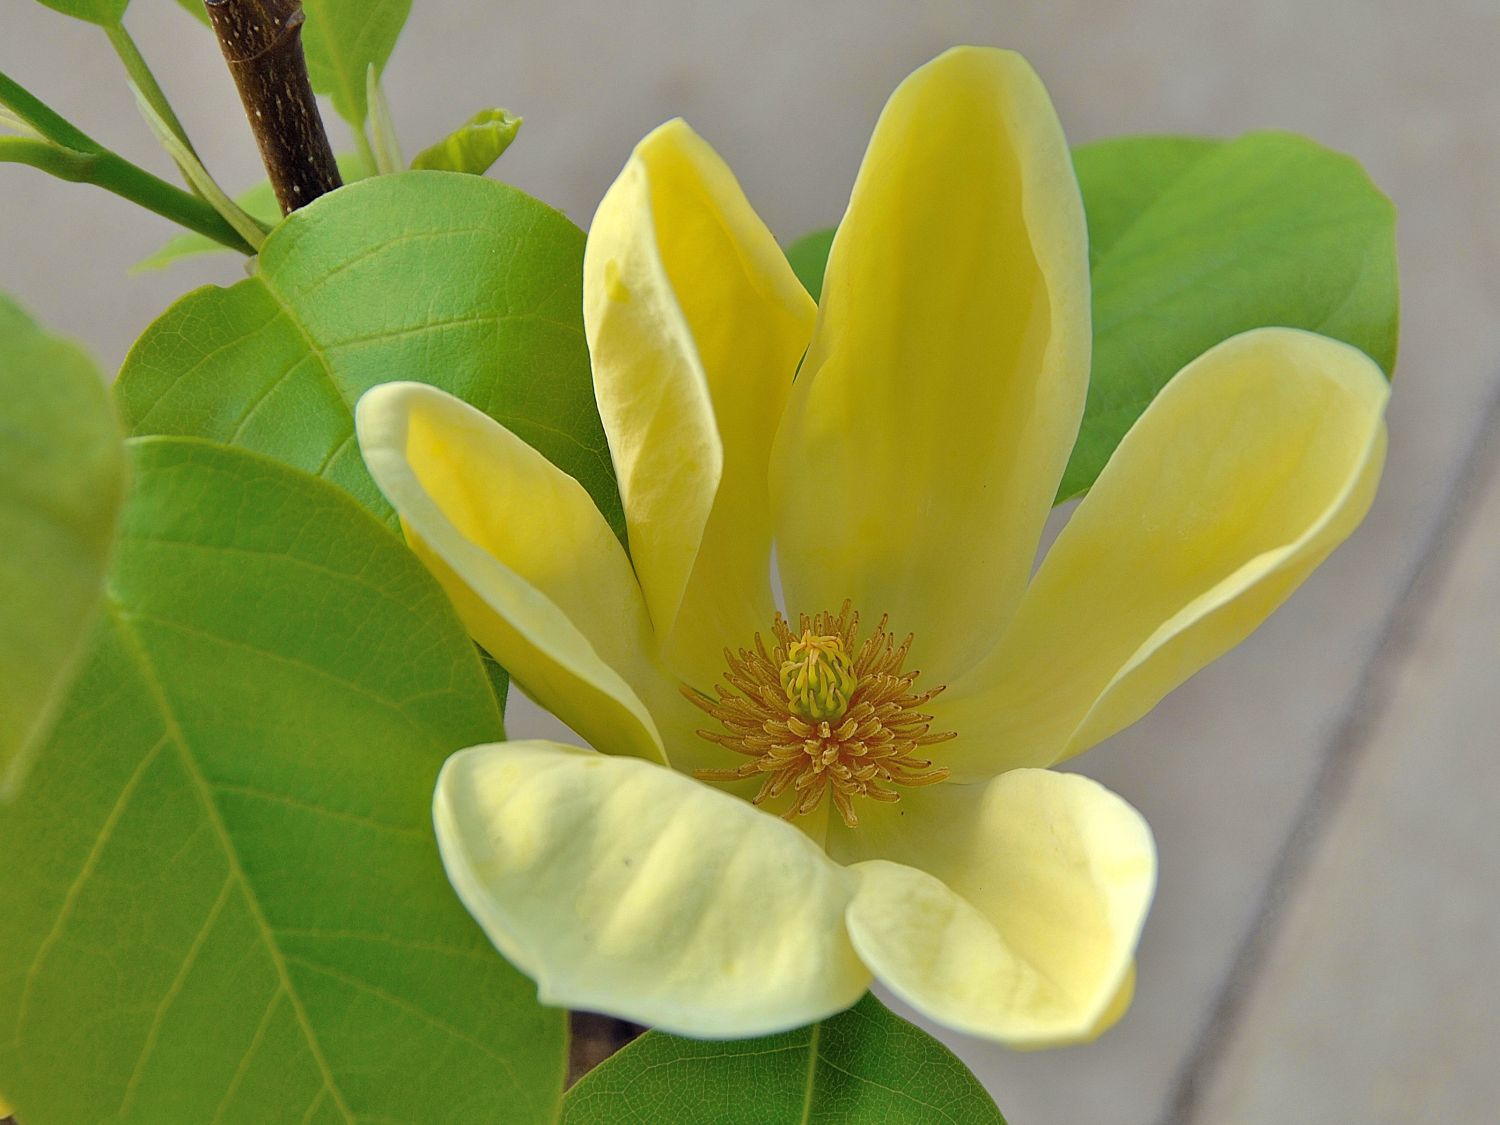 1650545846 86 Magnolia brings some extravagance to the garden - Magnolia brings some extravagance to the garden